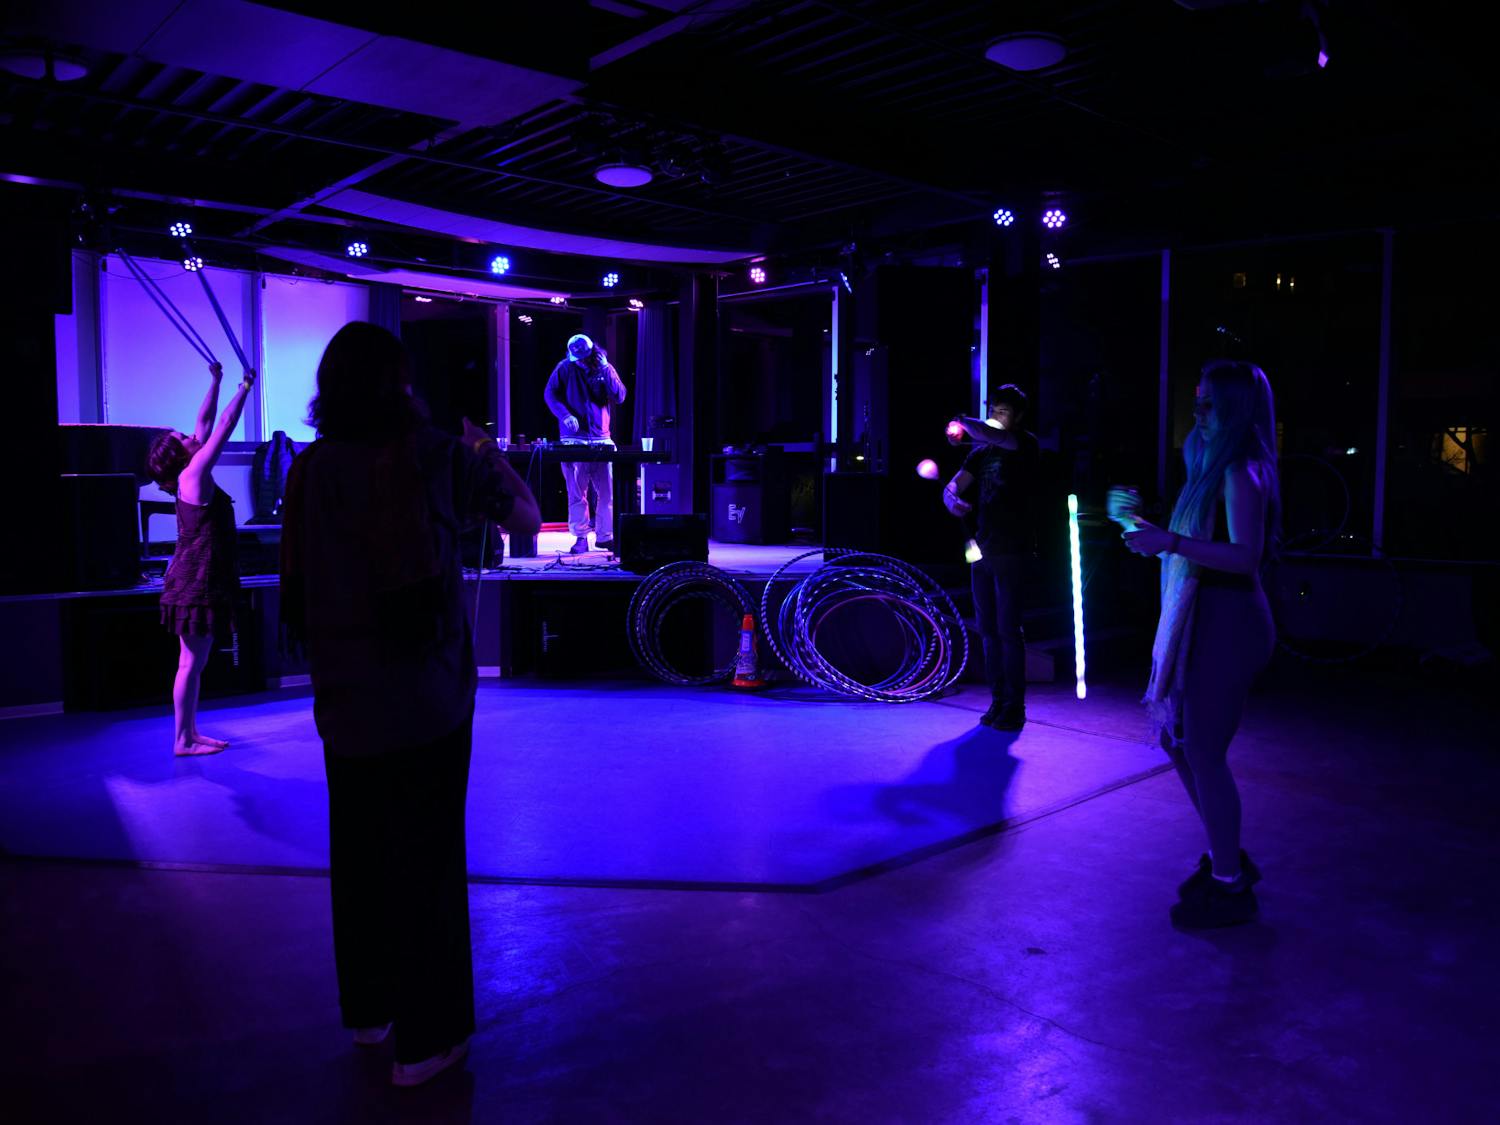 Spin Jam creates a sense of community among people who practice flow arts